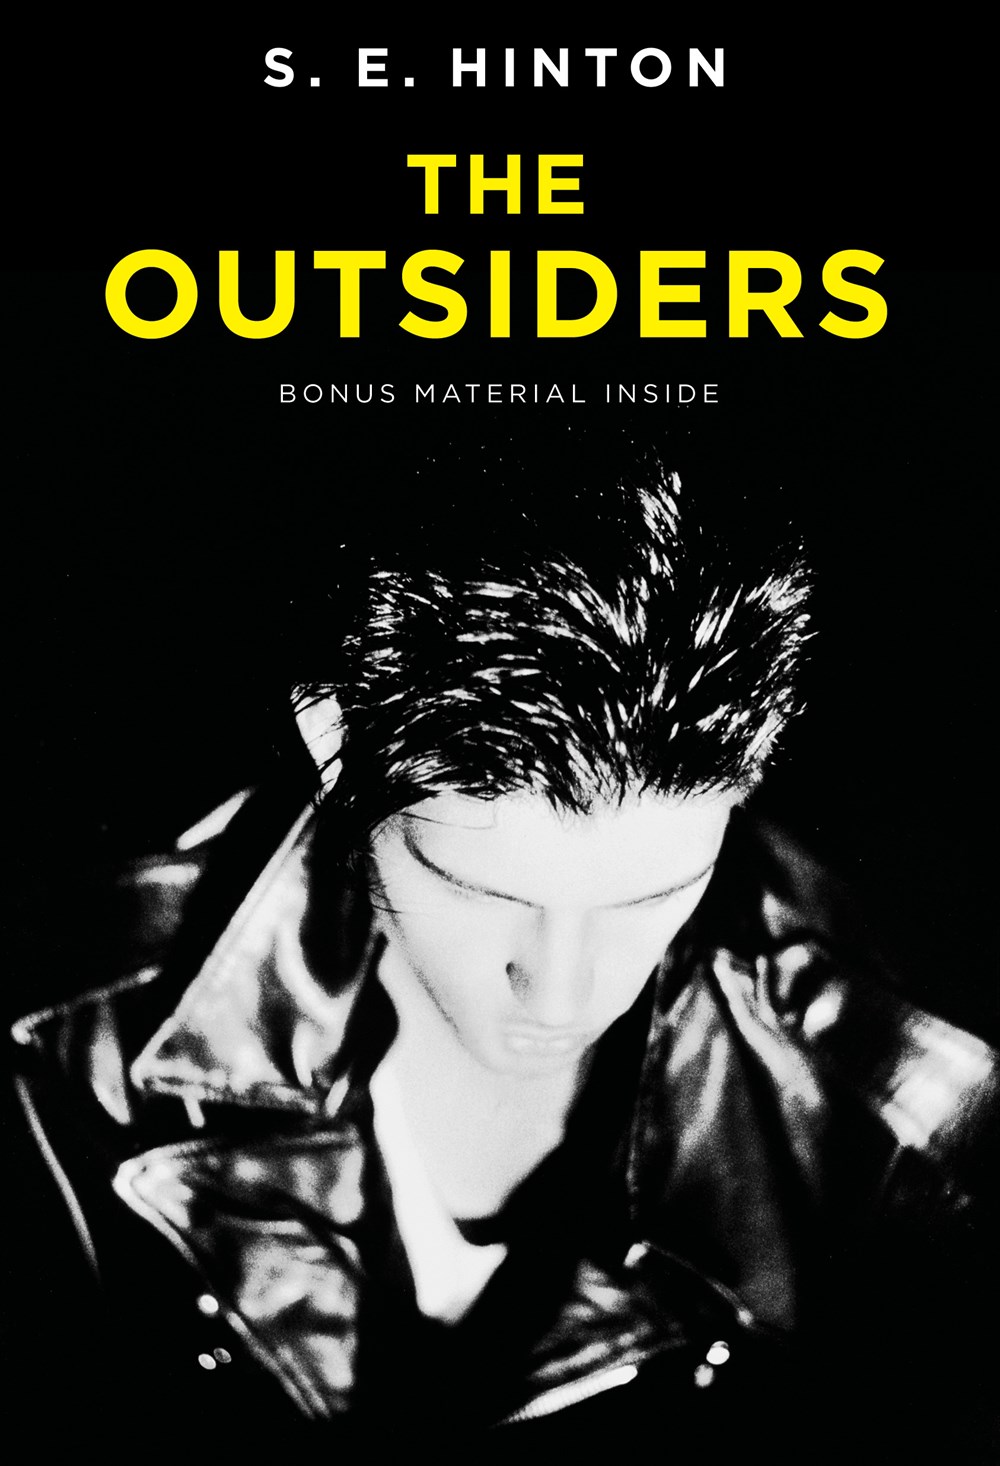 Image for "The Outsiders"